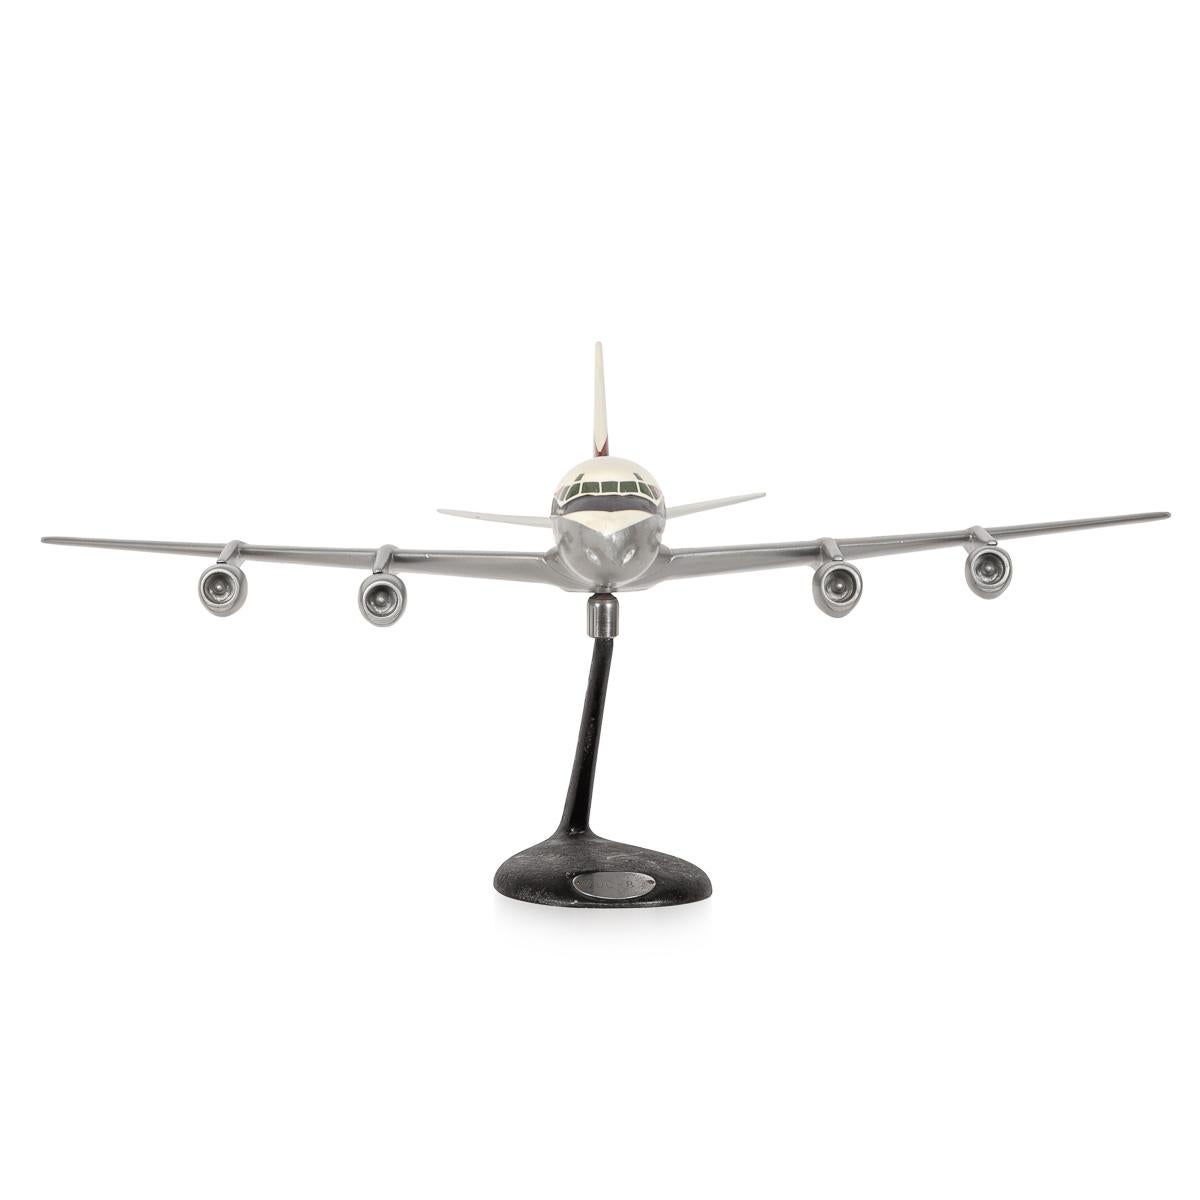 A stunning model of an airplane (USA, Douglas DC-8), made of aluminium and hand painted, crafted to the last detail.